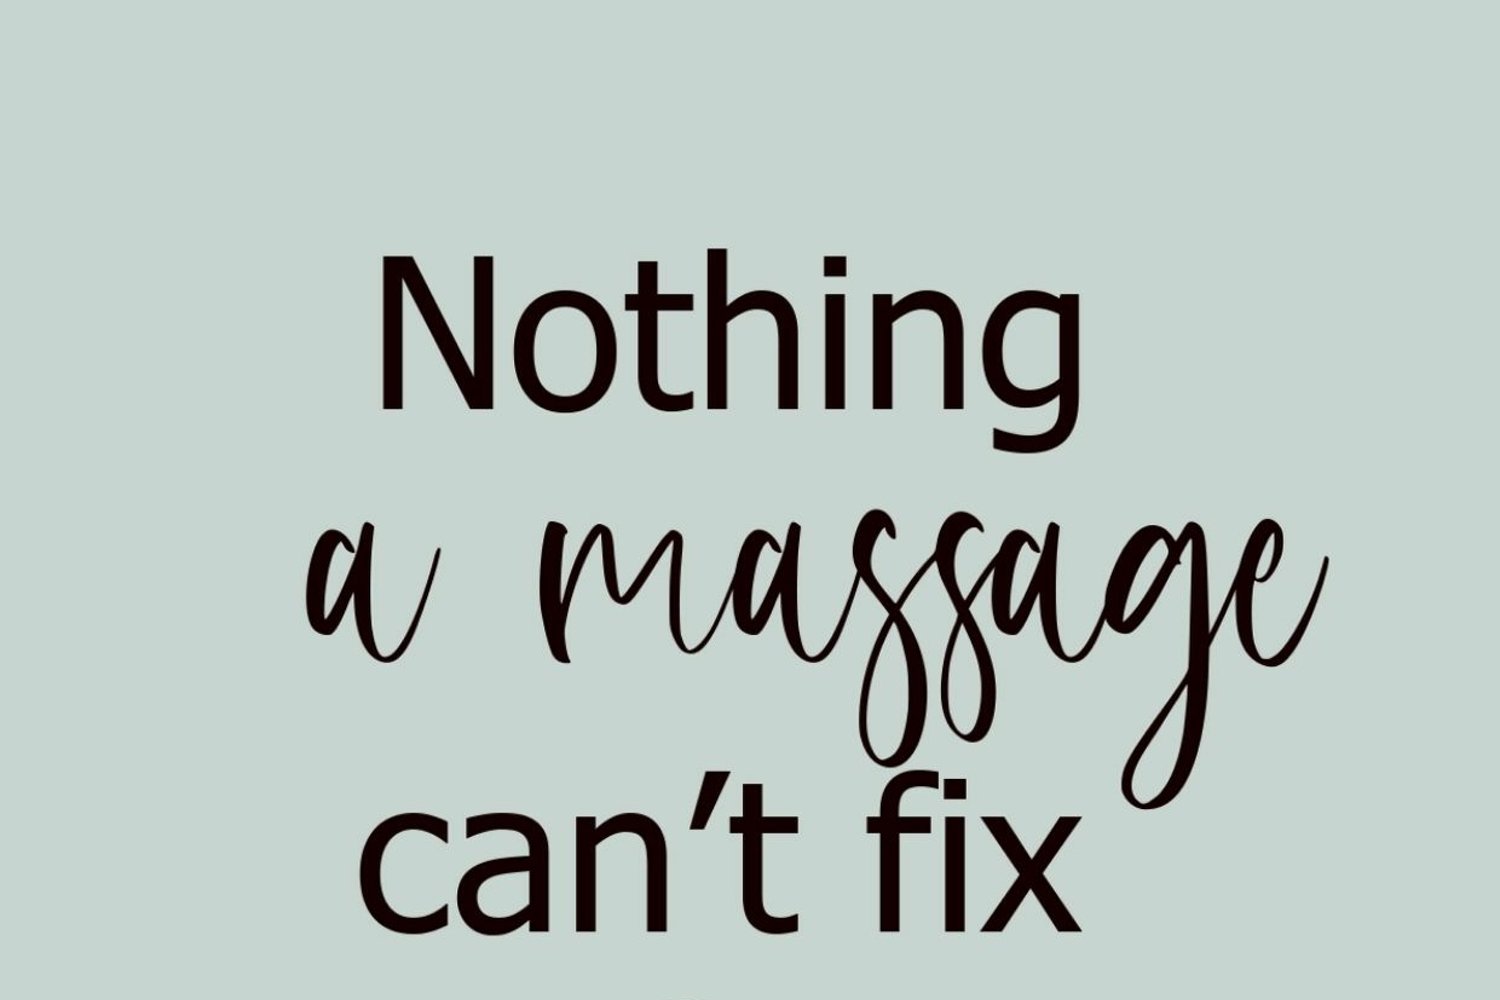 Nothing a massage can't fix.